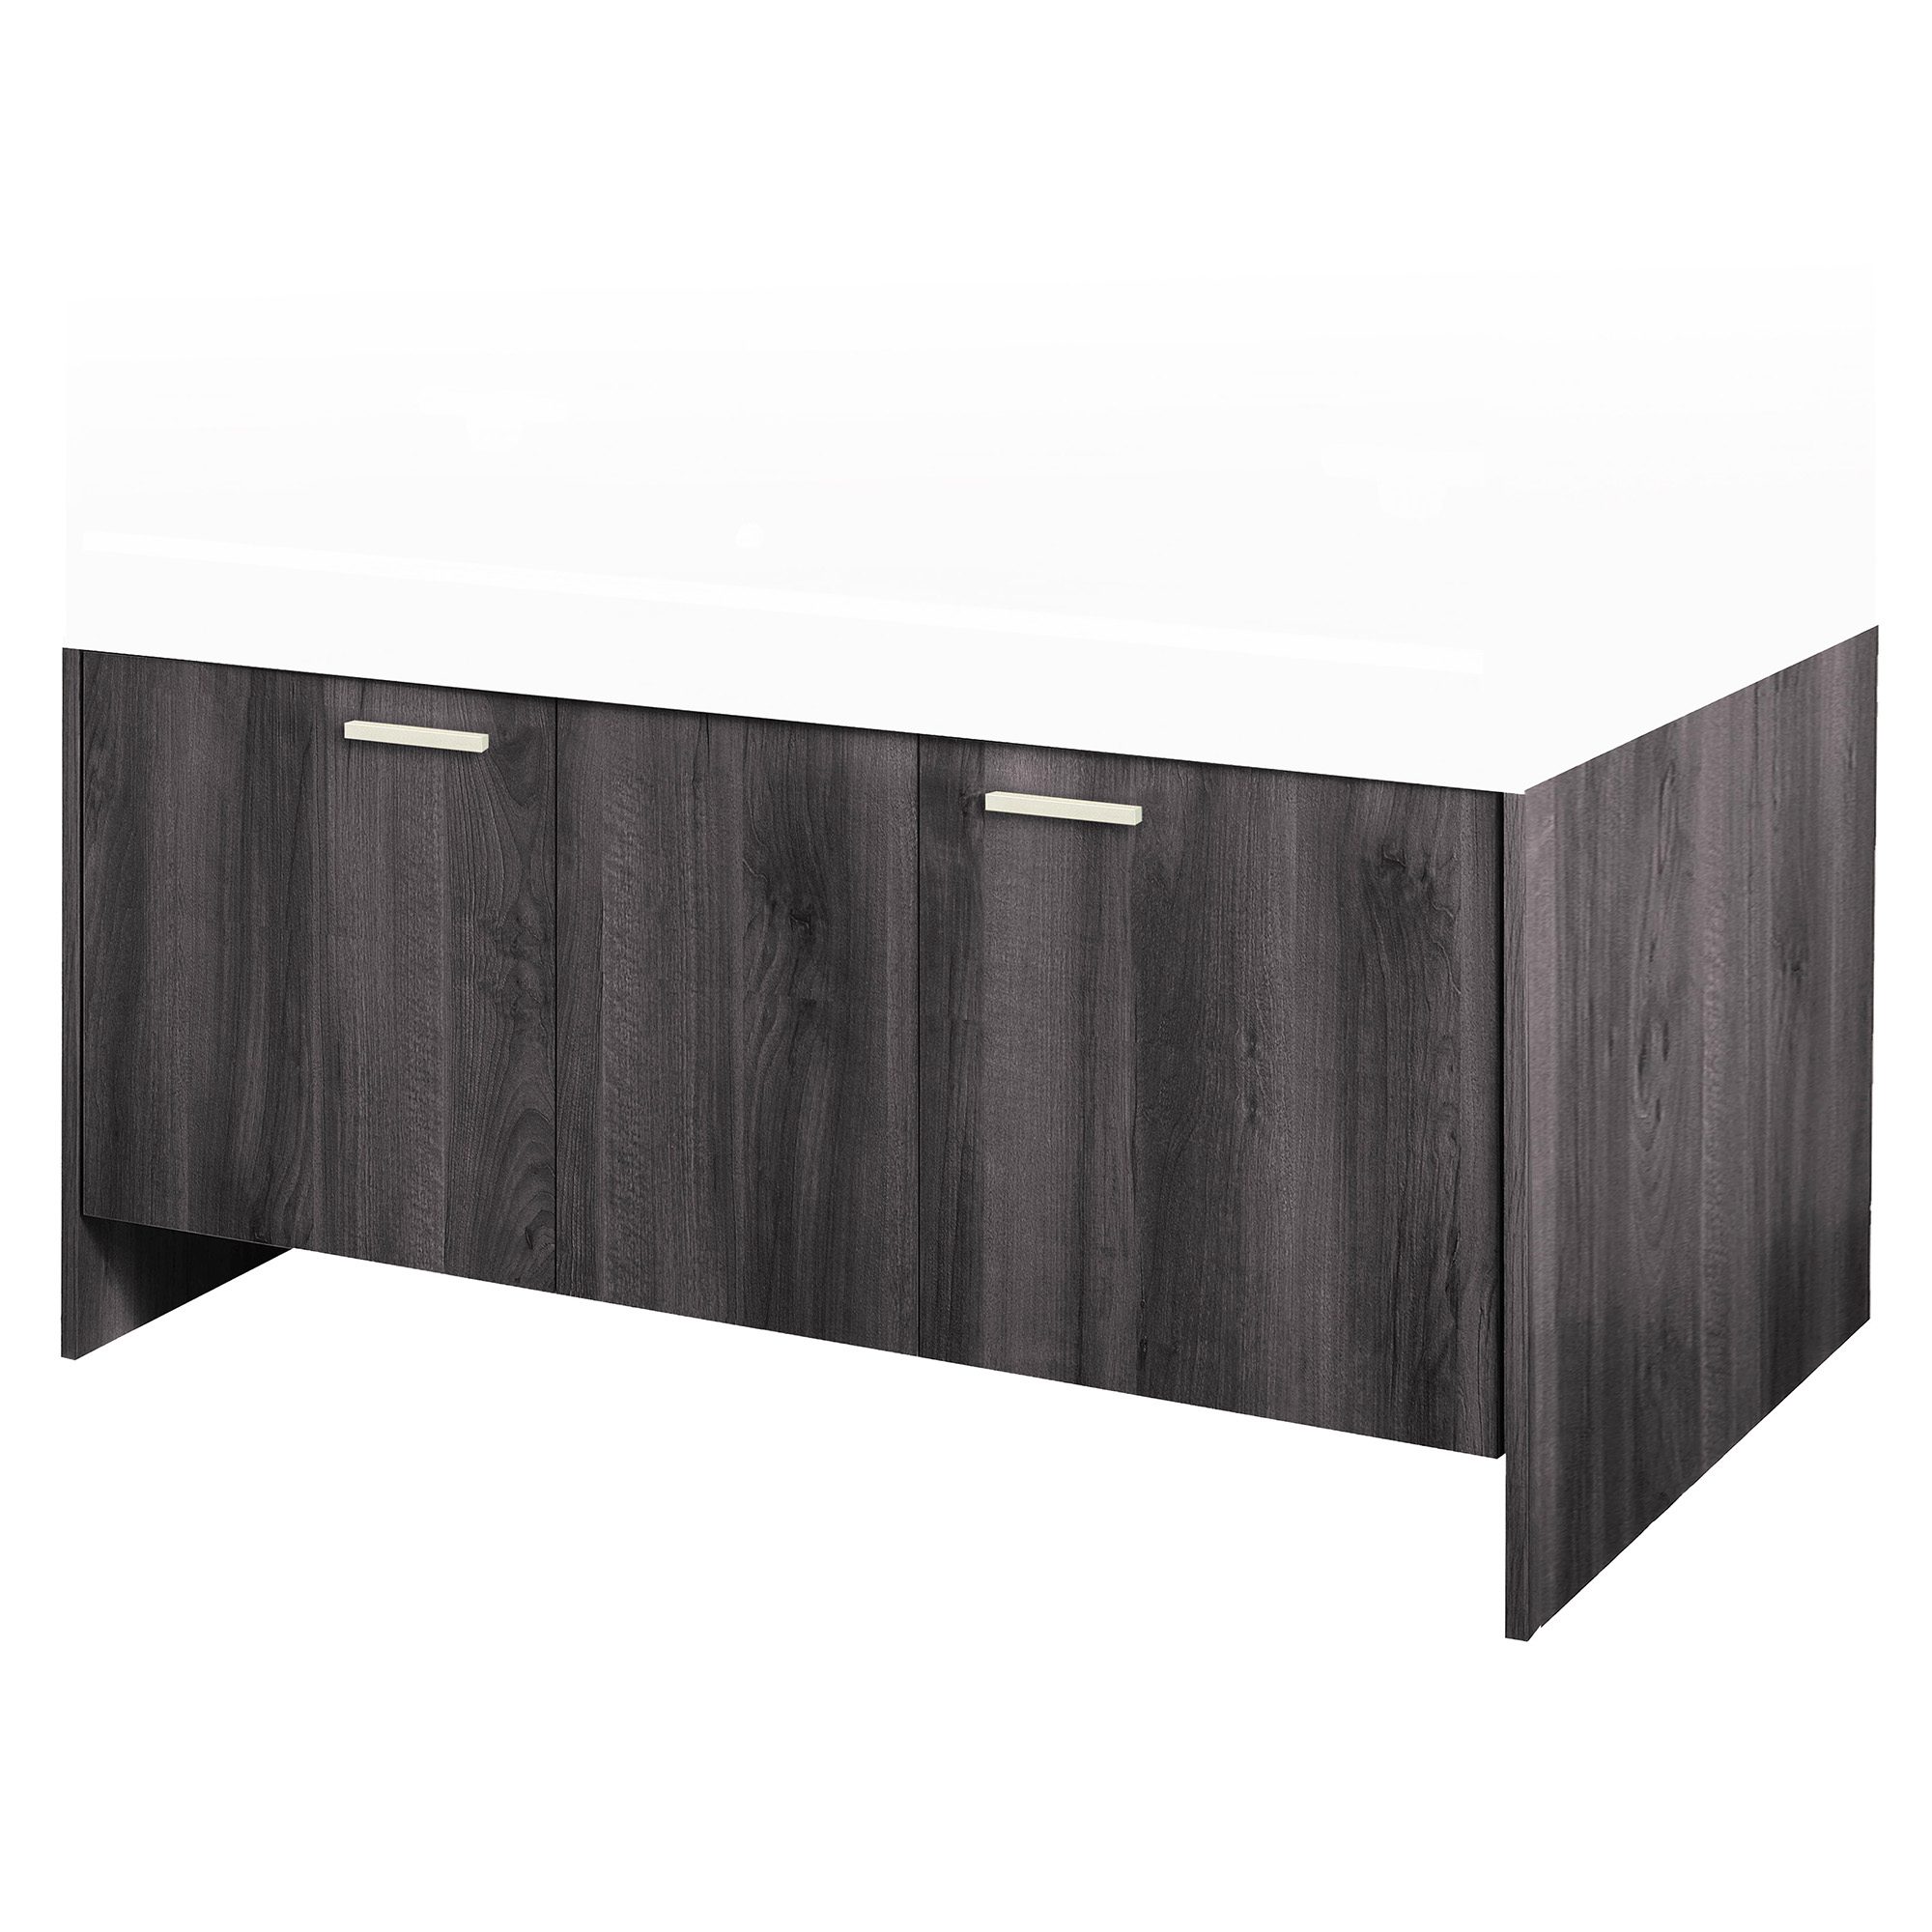 VE Repti-Home Cabinet (AAL) BD GREY PT4184